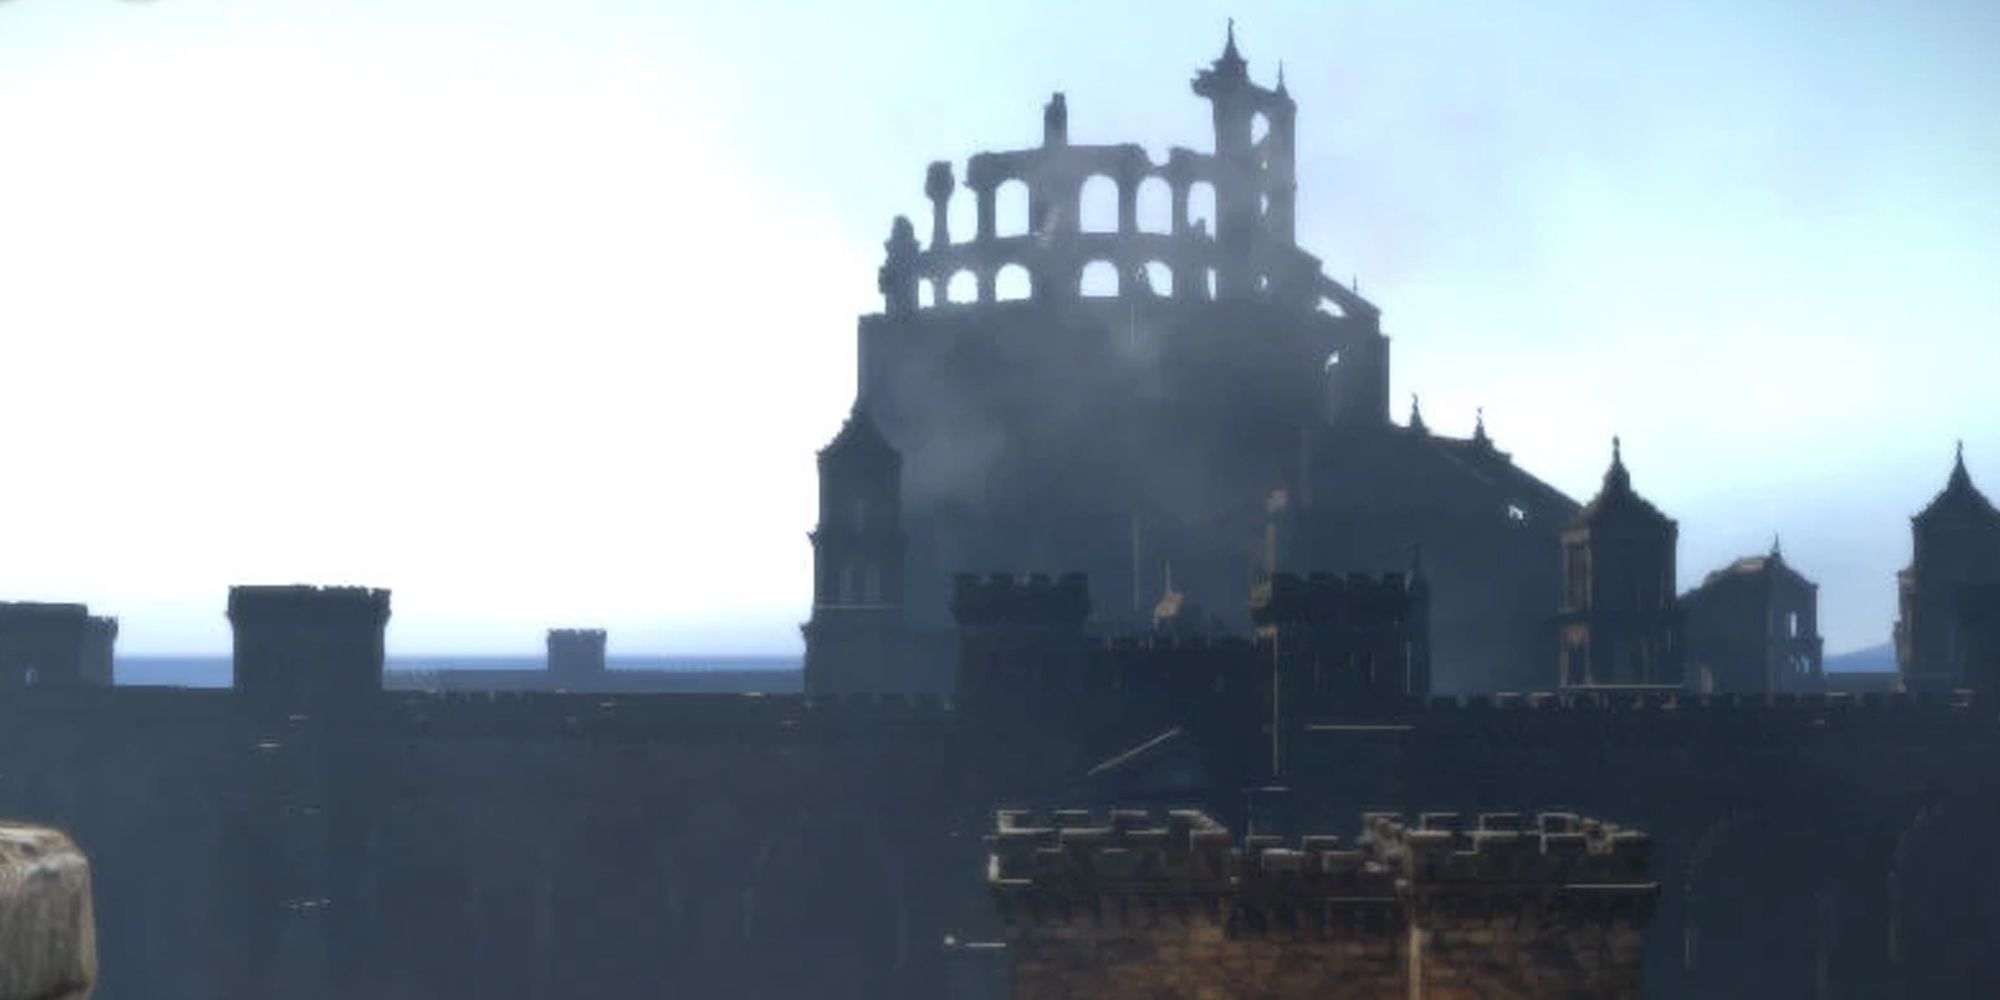 Dragon's Dogma Bluemoon Tower behind the castle walls